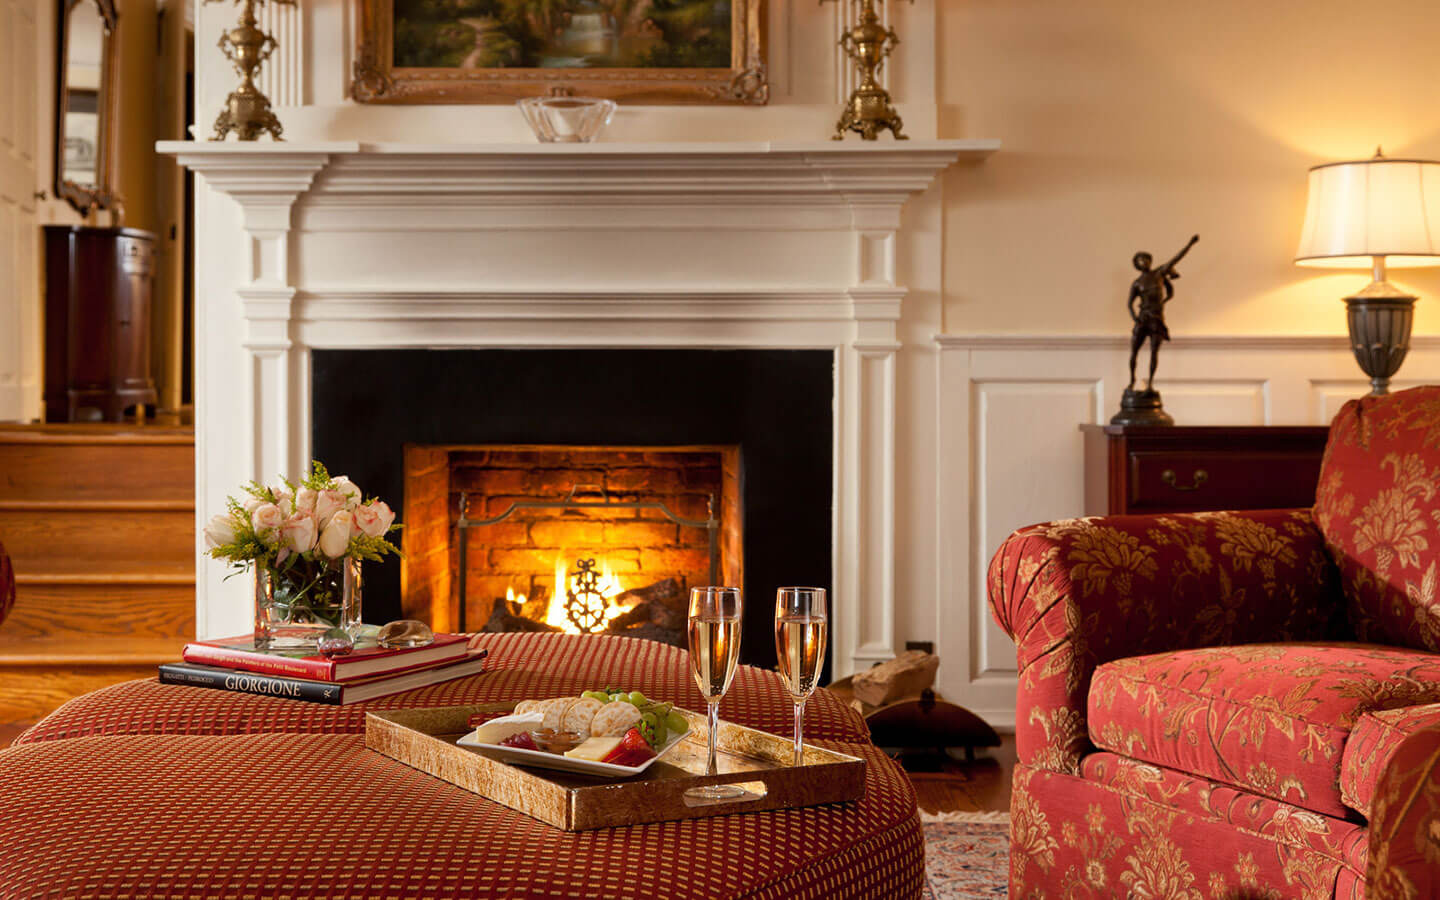 Curl up by the fire and in a luxurious suite at our bed and breakfast near Culpeper, VA